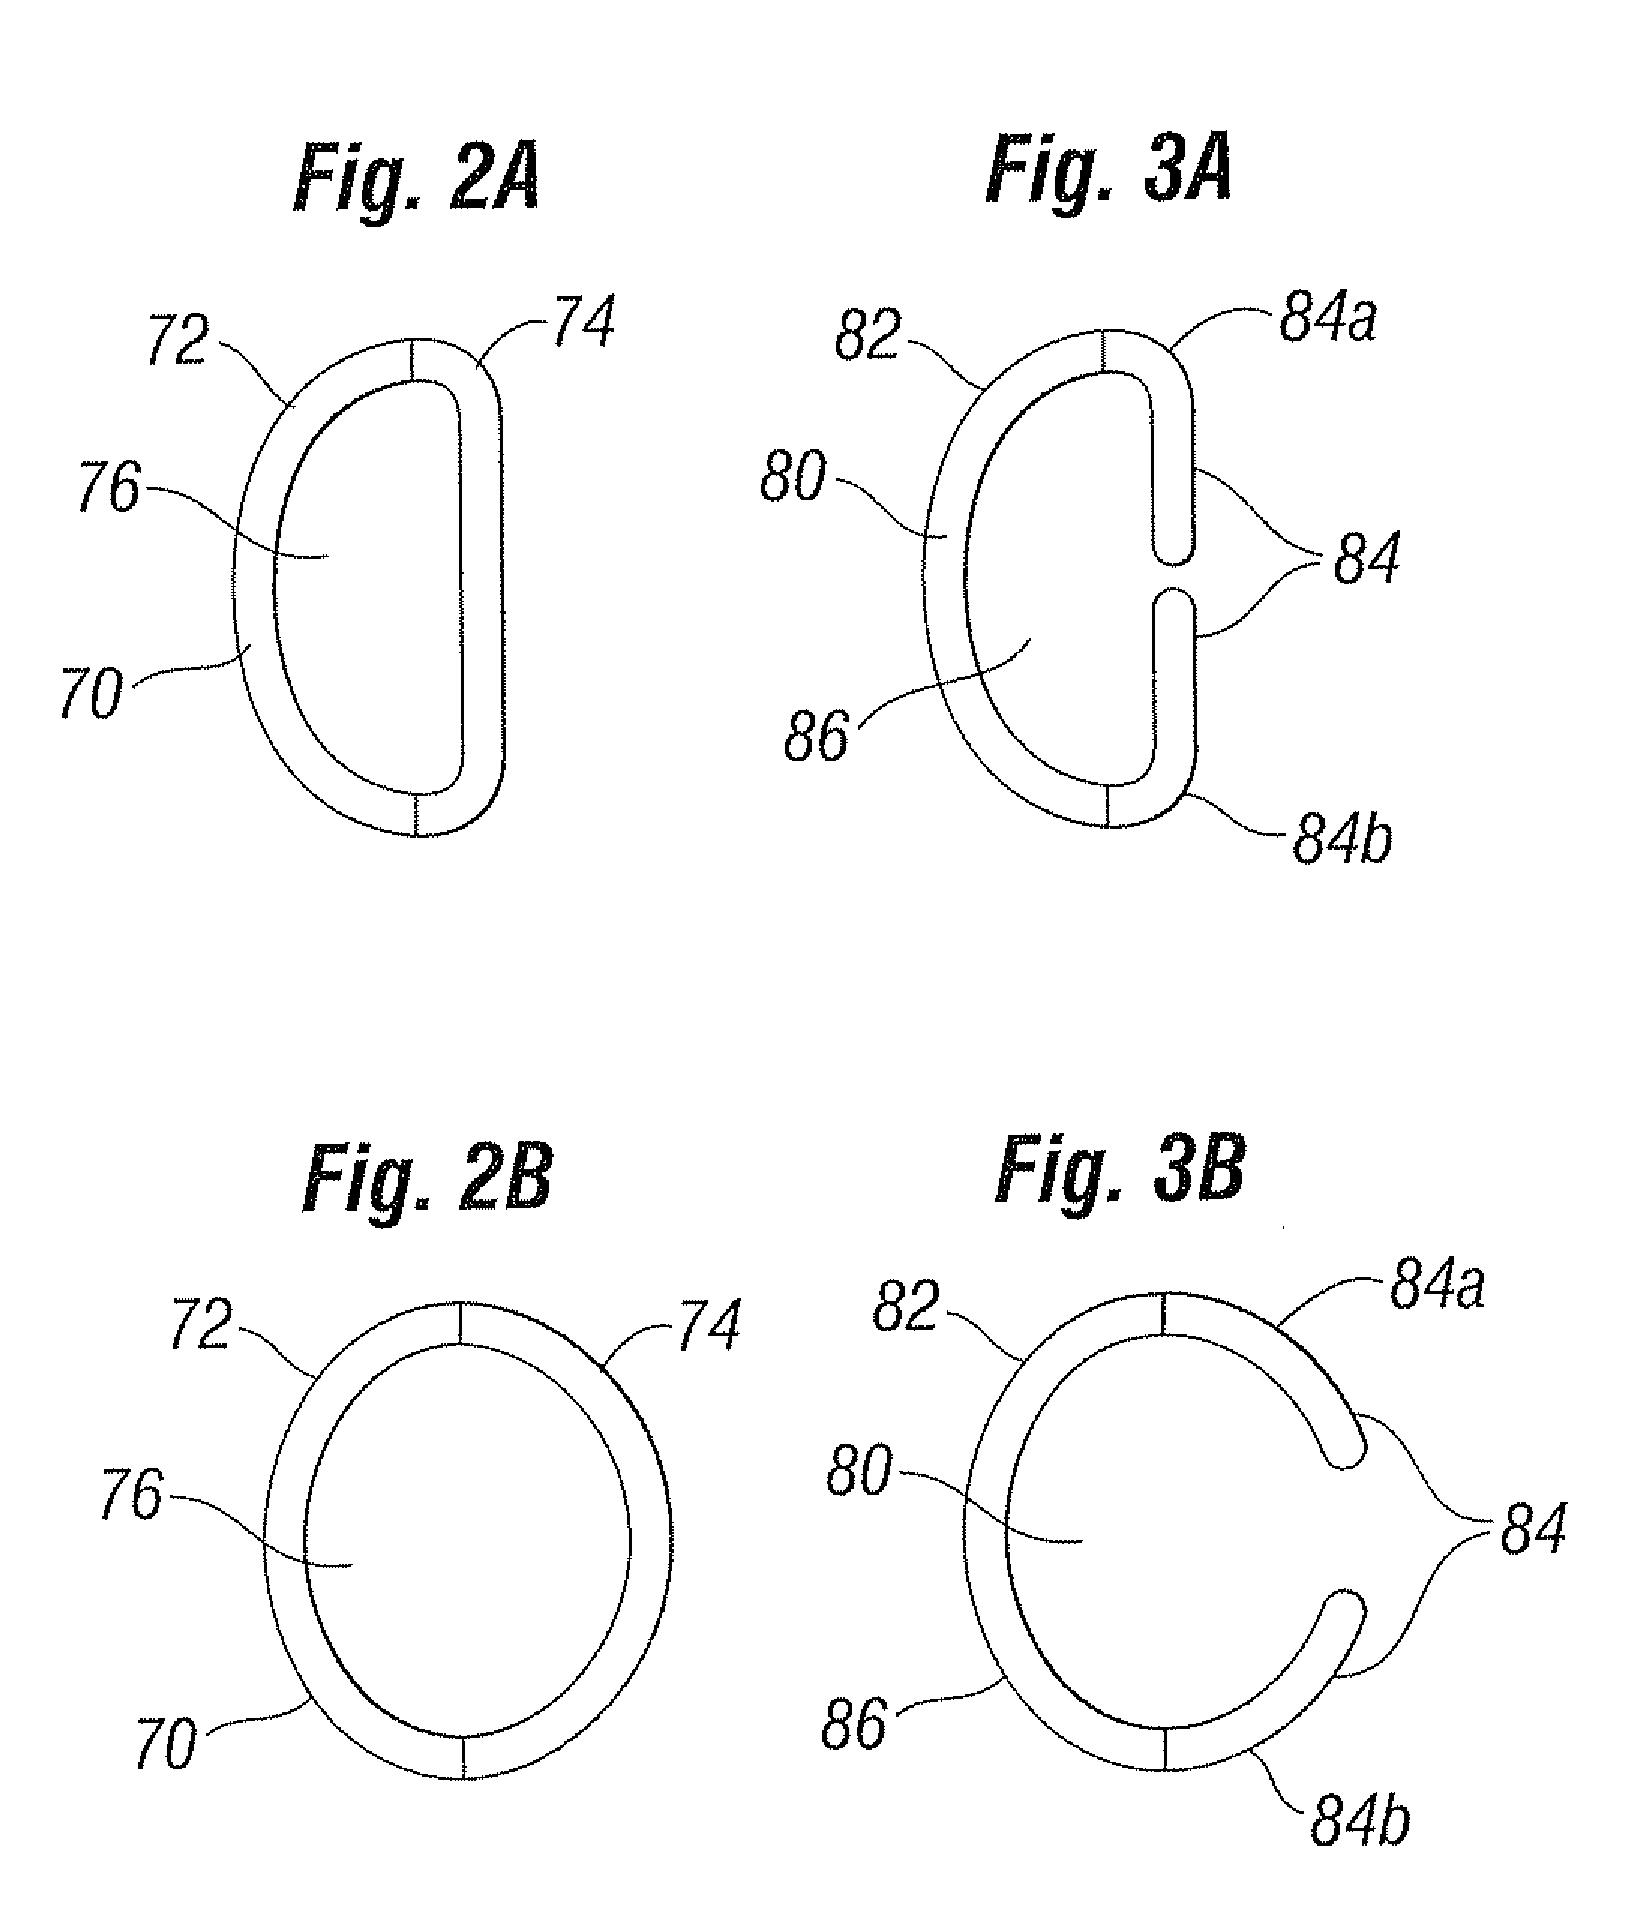 Transformable annuloplasty ring configured to receive a percutaneous prosthetic heart valve implantation